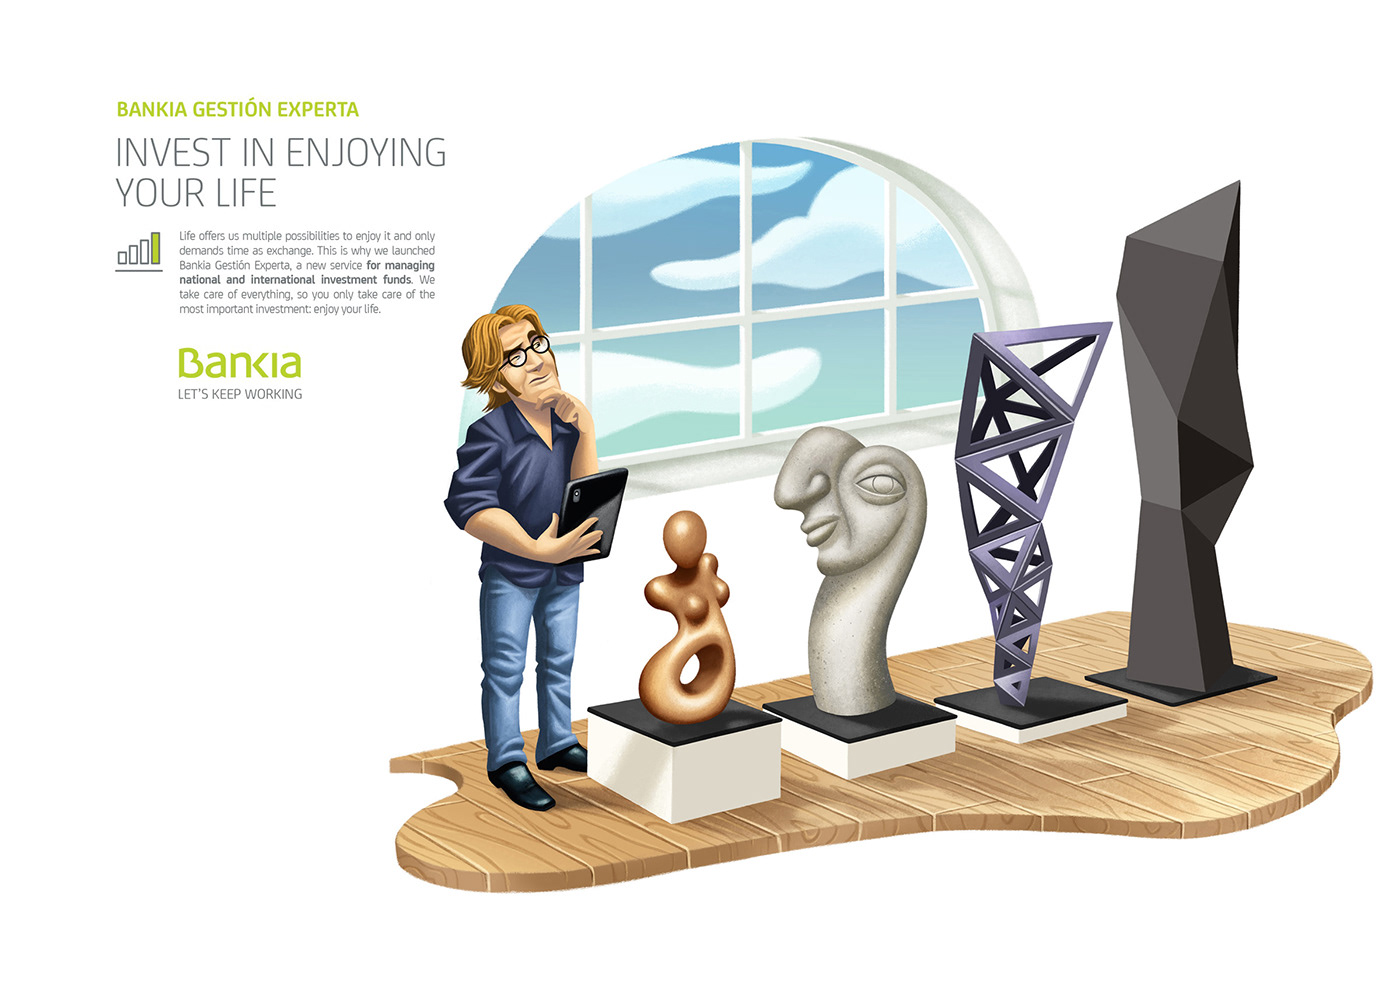 Printed campaign and exterior graphics for Bankia Bank on their new investment funds program